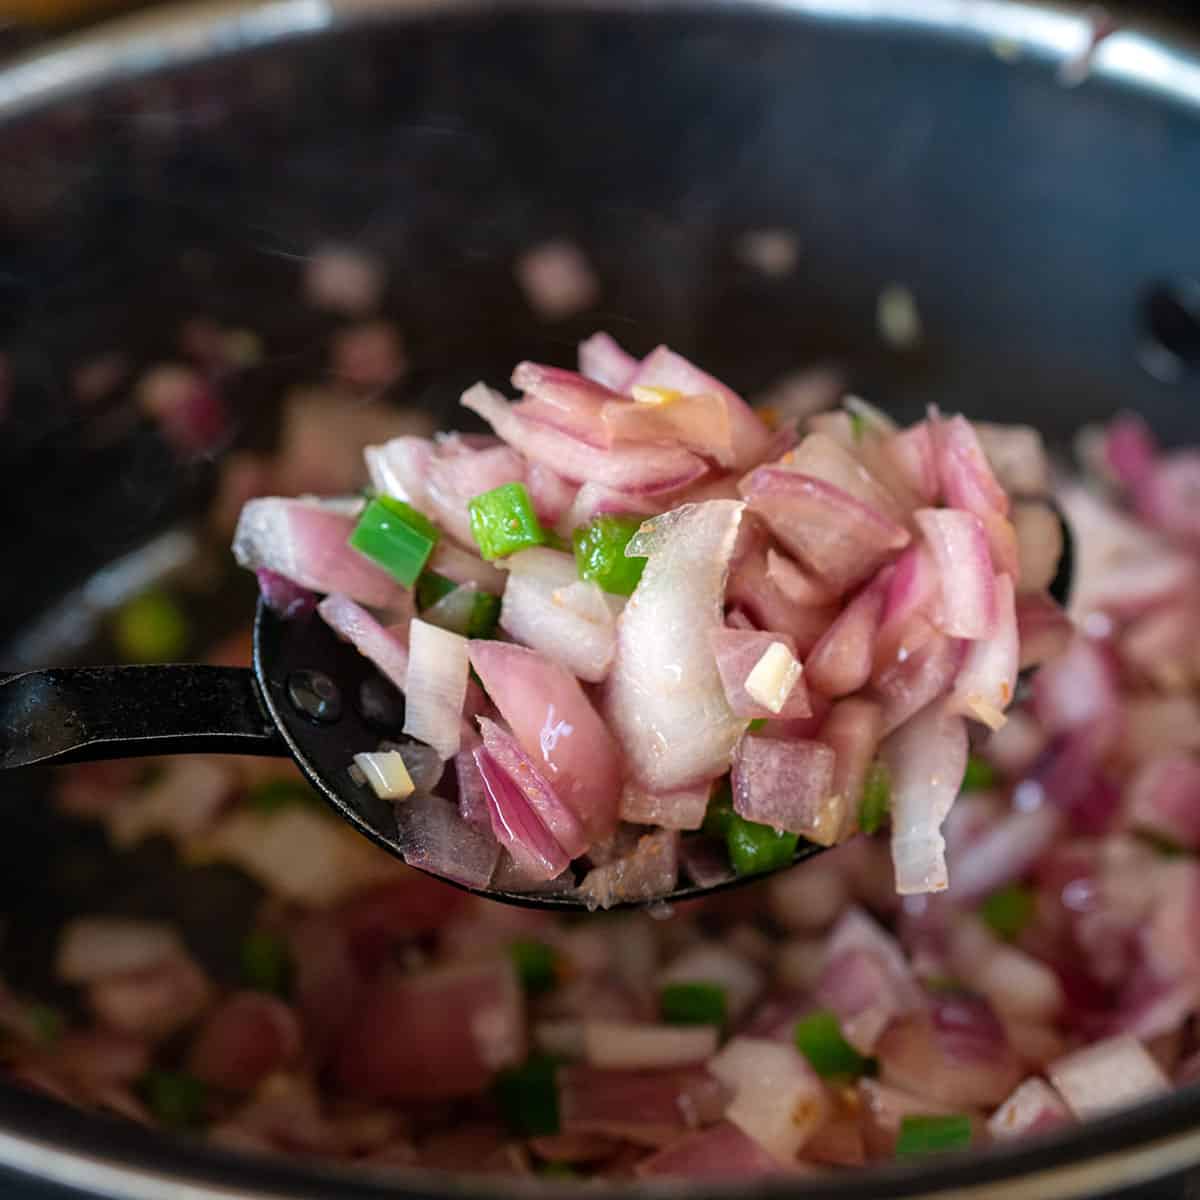 spoon showing sautéed onion, pepper and garlic.